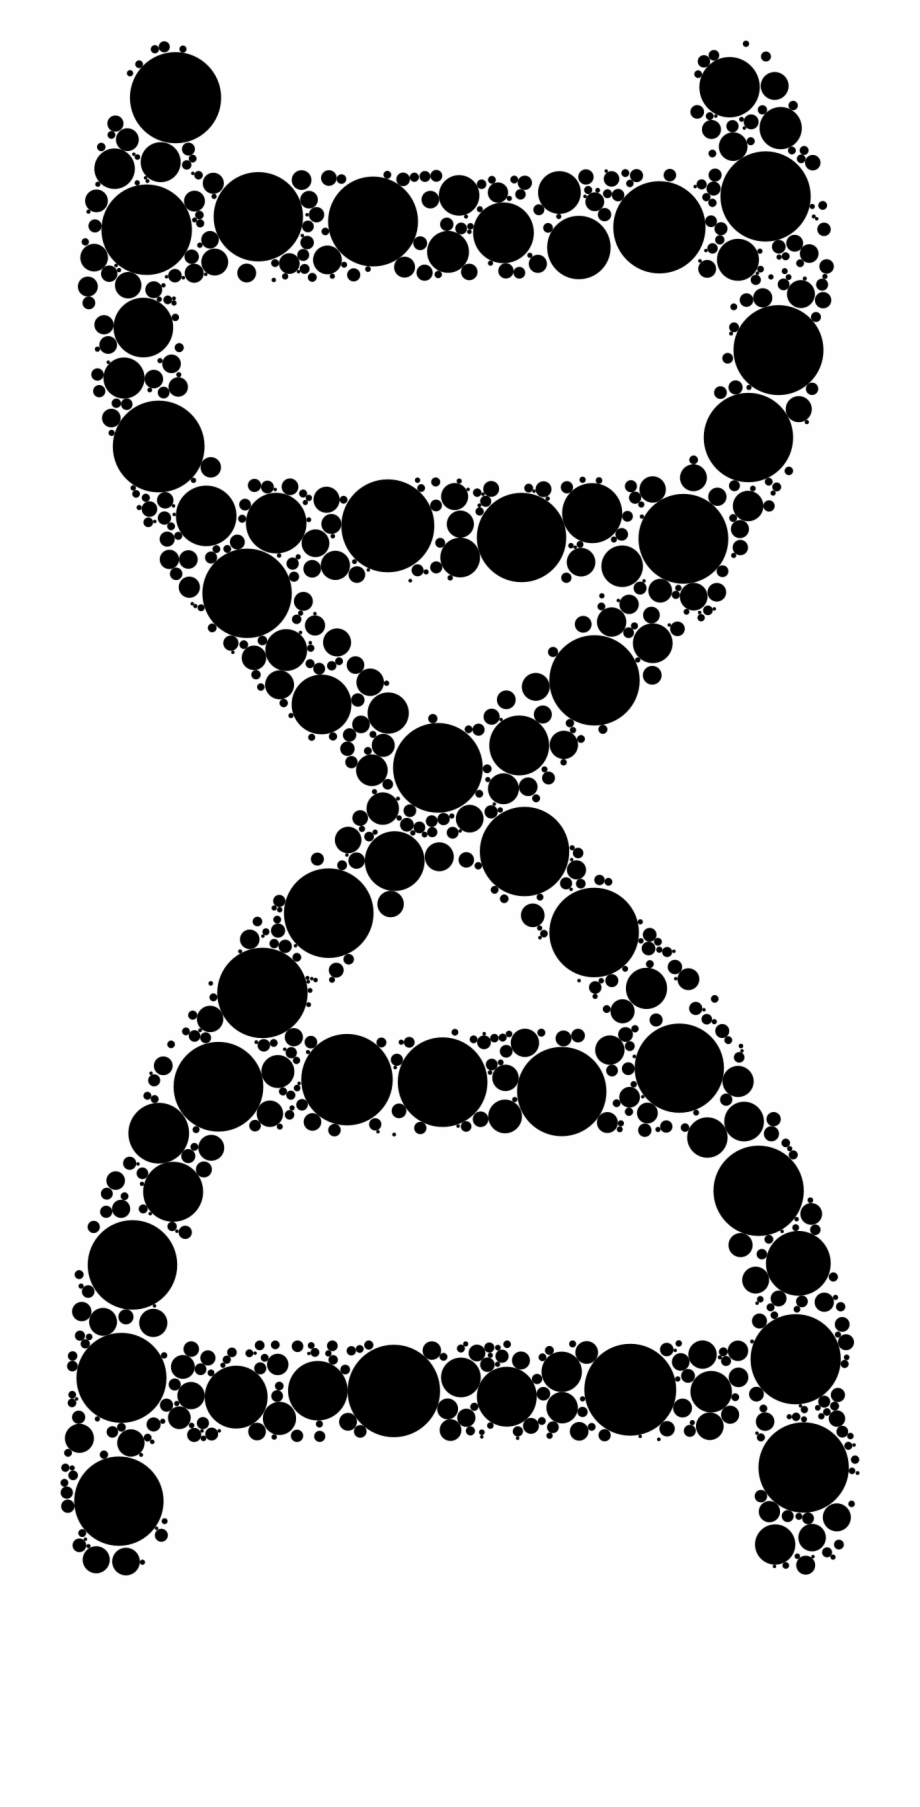 This Free Icons Png Design Of Dna Helix